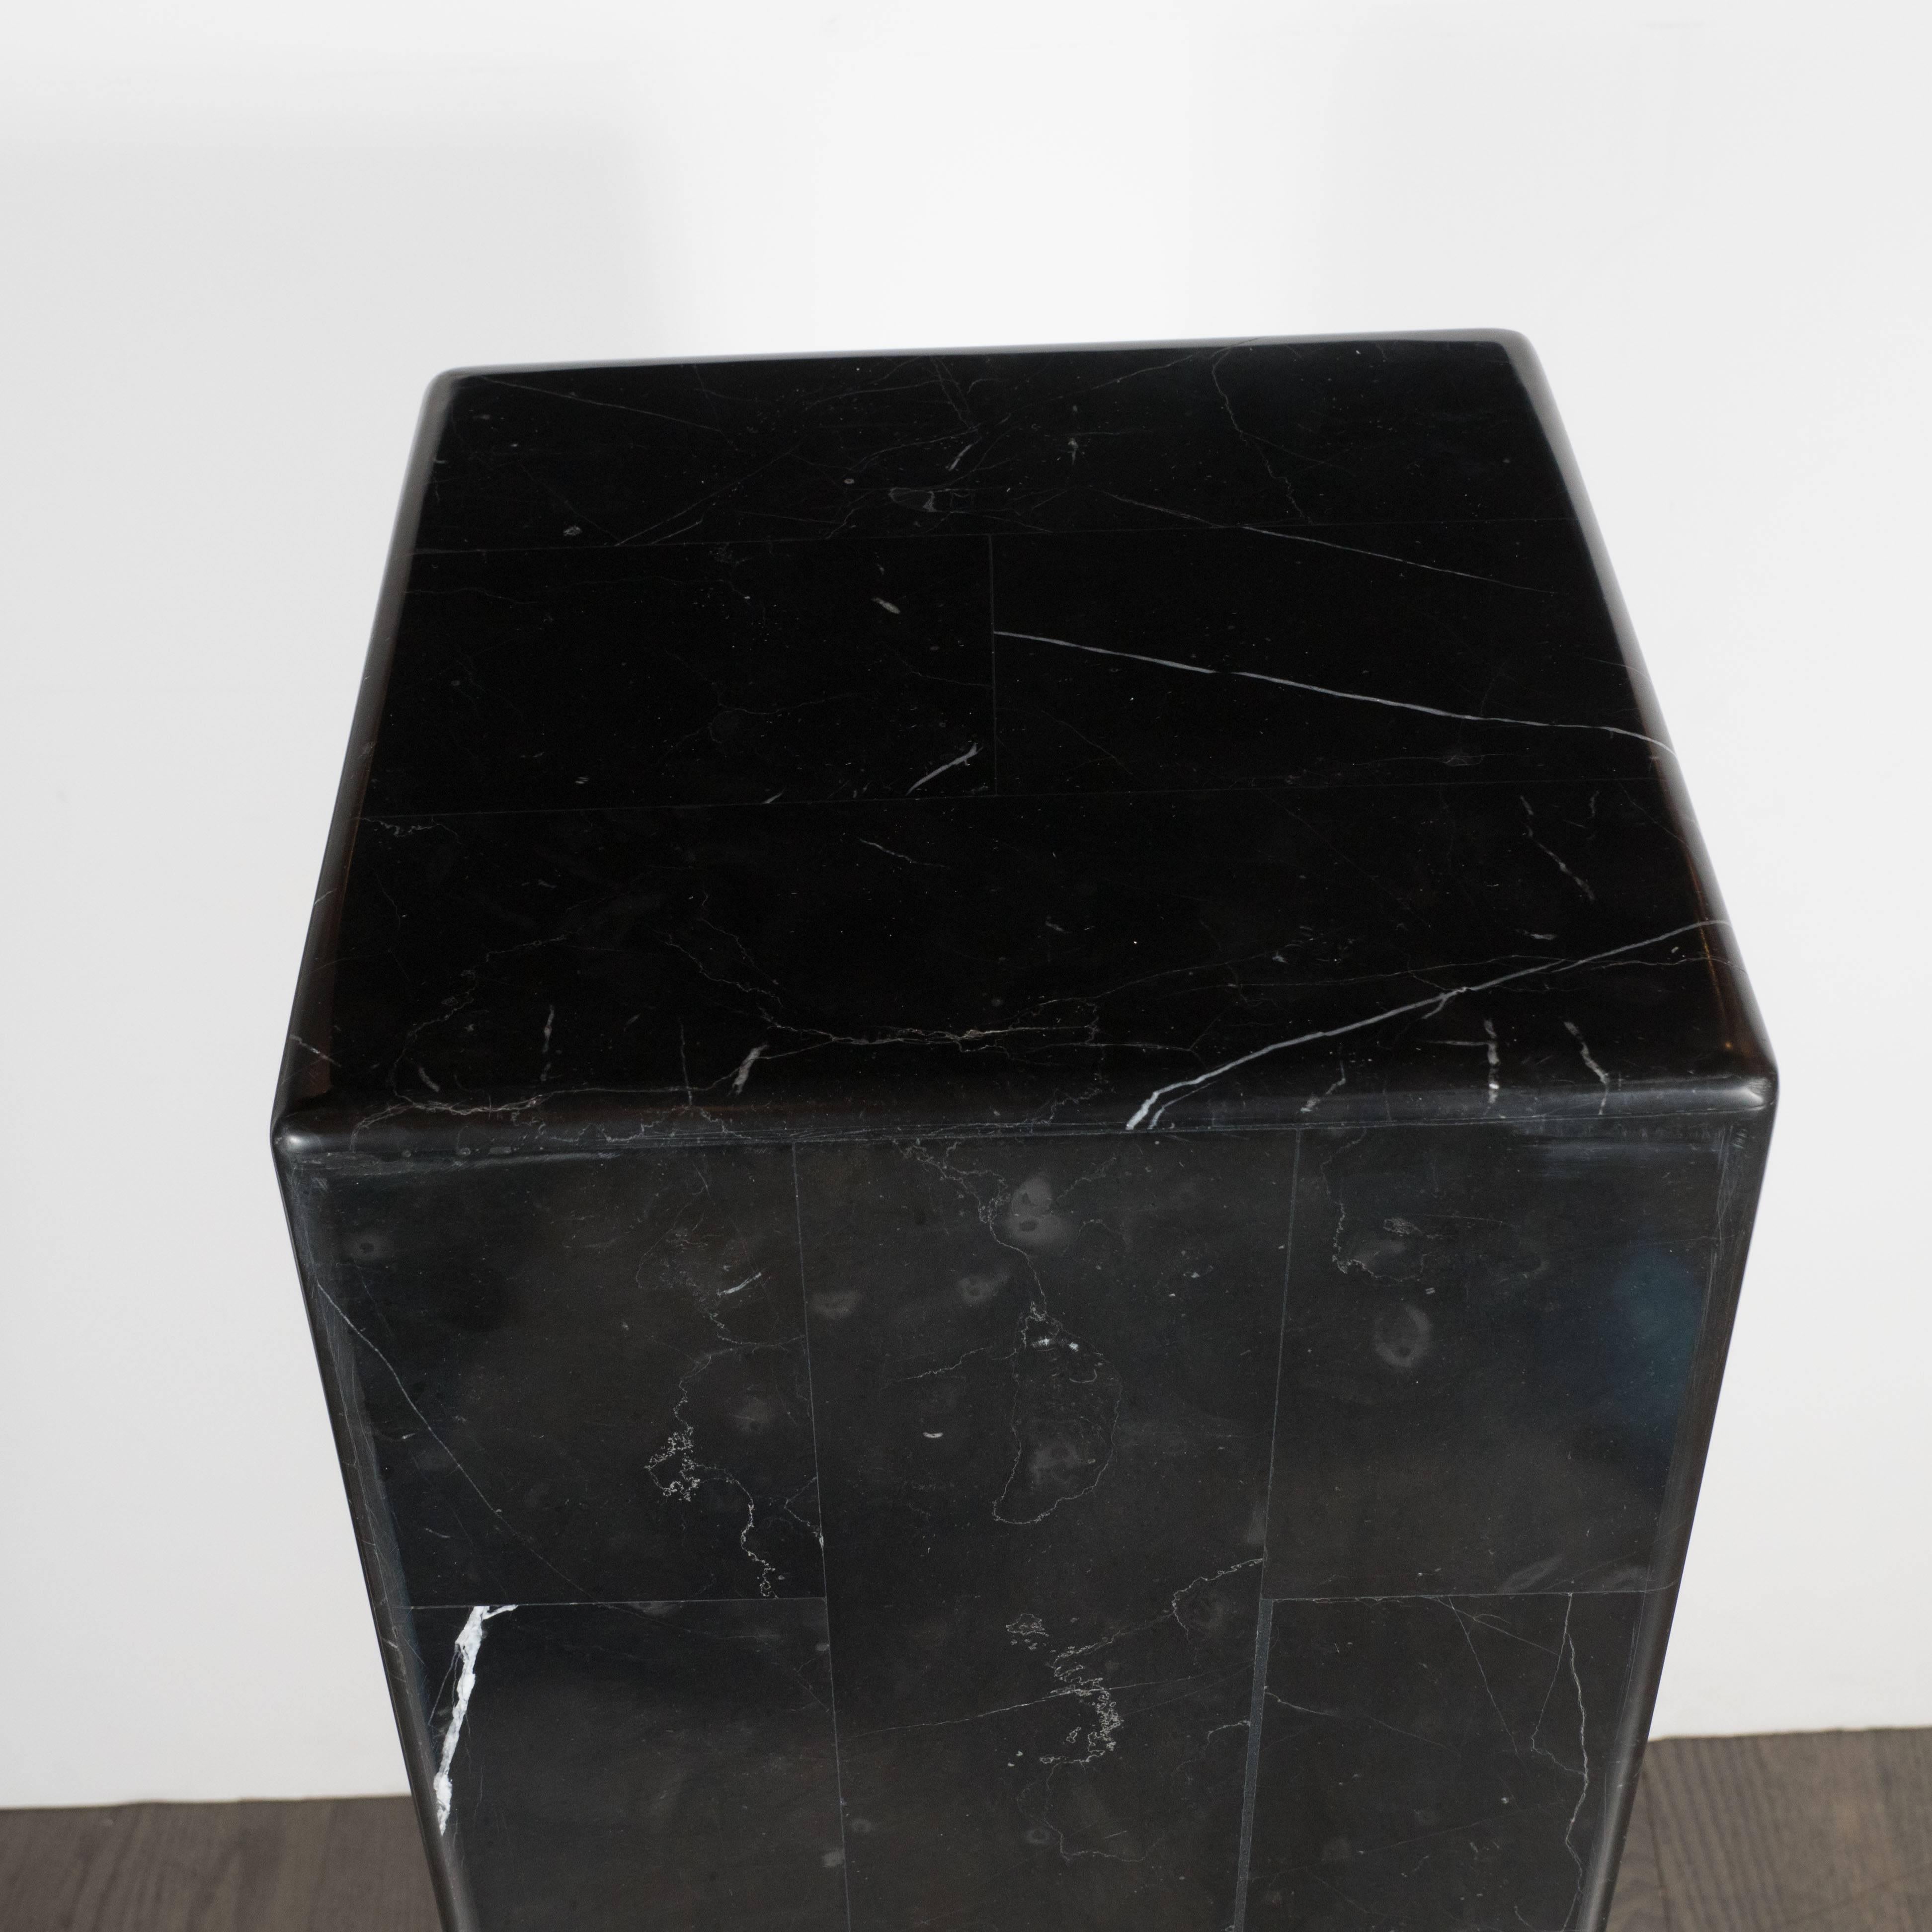 This clean modernist black Belgian marble pedestal features a simple tessellated block design, allowing the beauty of the stone to speak for itself. While the design is neutral enough to blend in with virtually any object one might choose to rest on